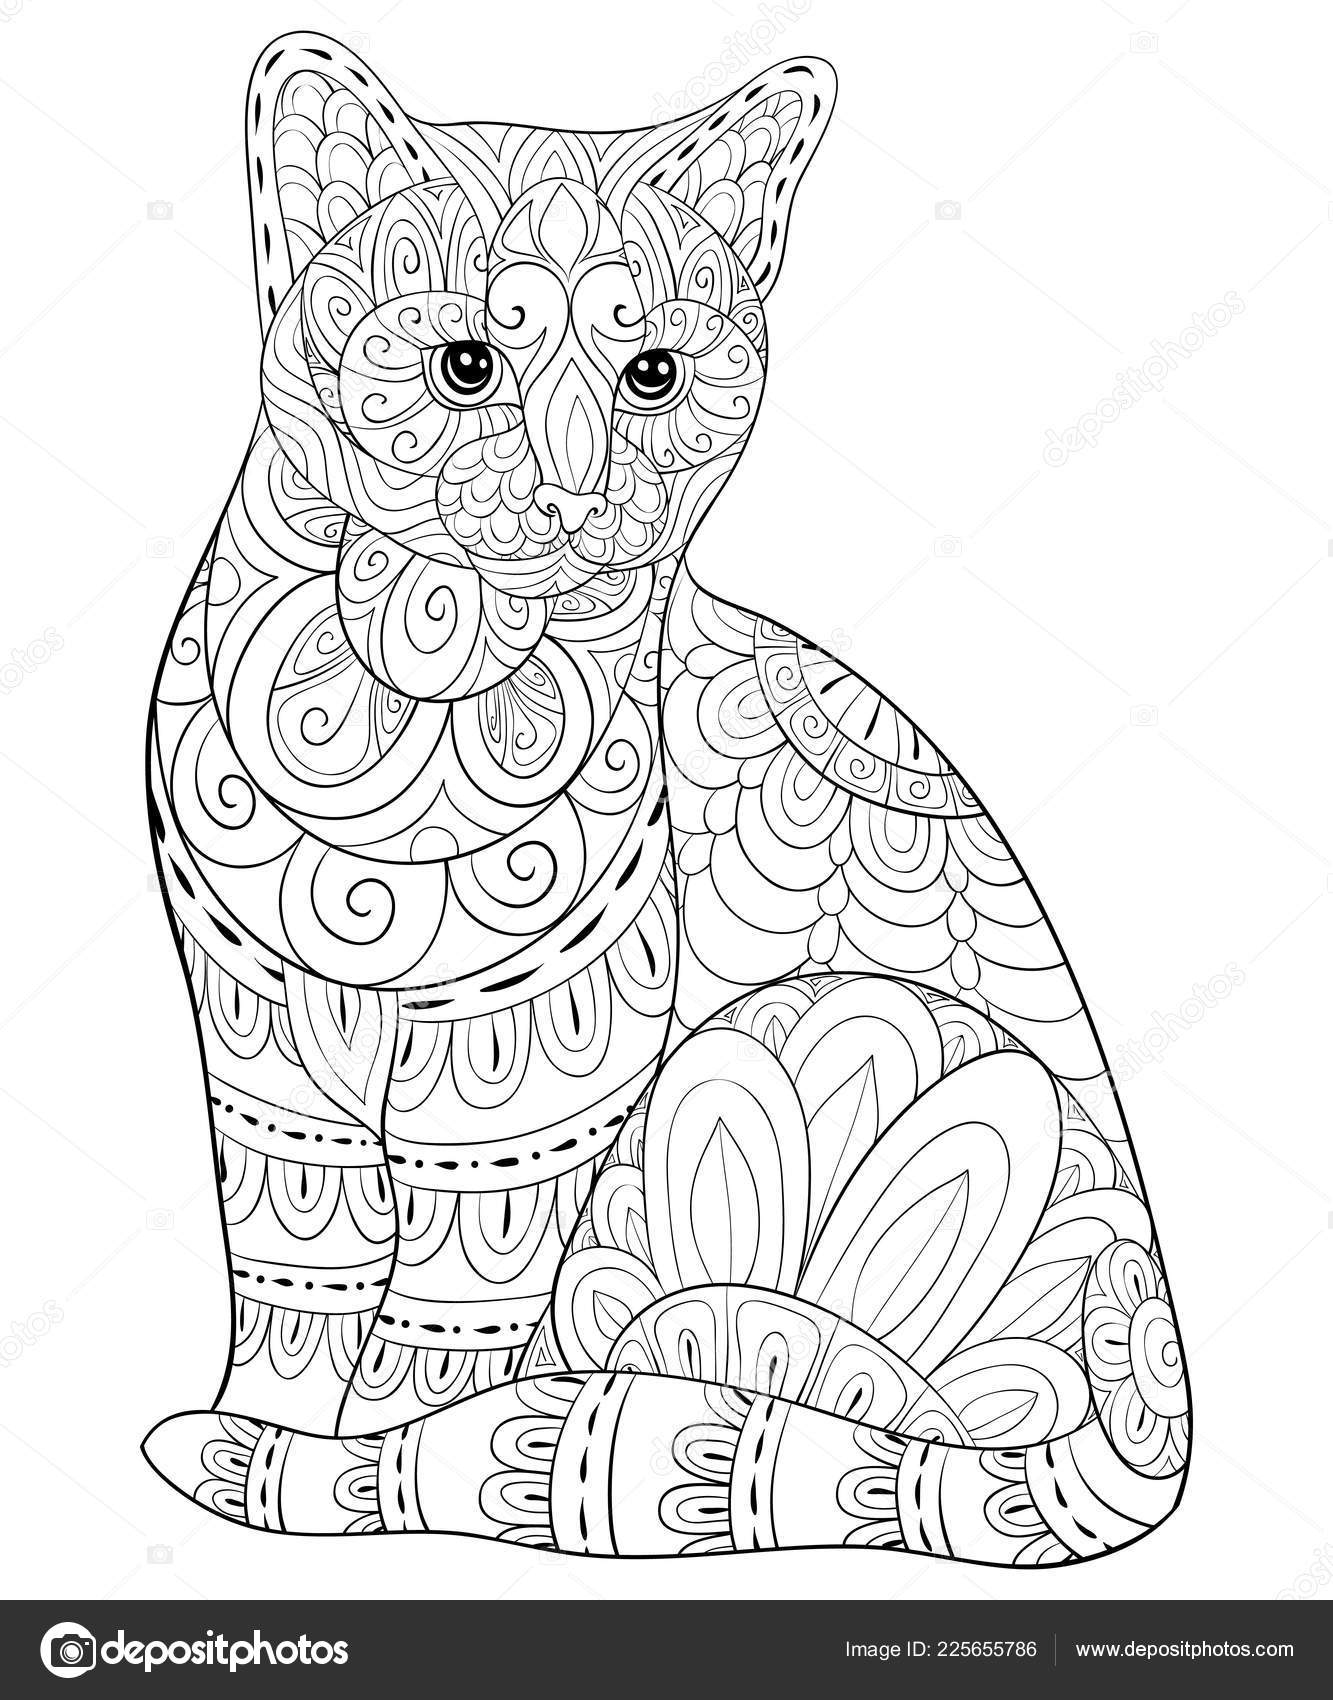 Adult Coloring Book Page Cute Cat Image Relaxing Zen Art Stock Vector by  ©nonuzza 225655786